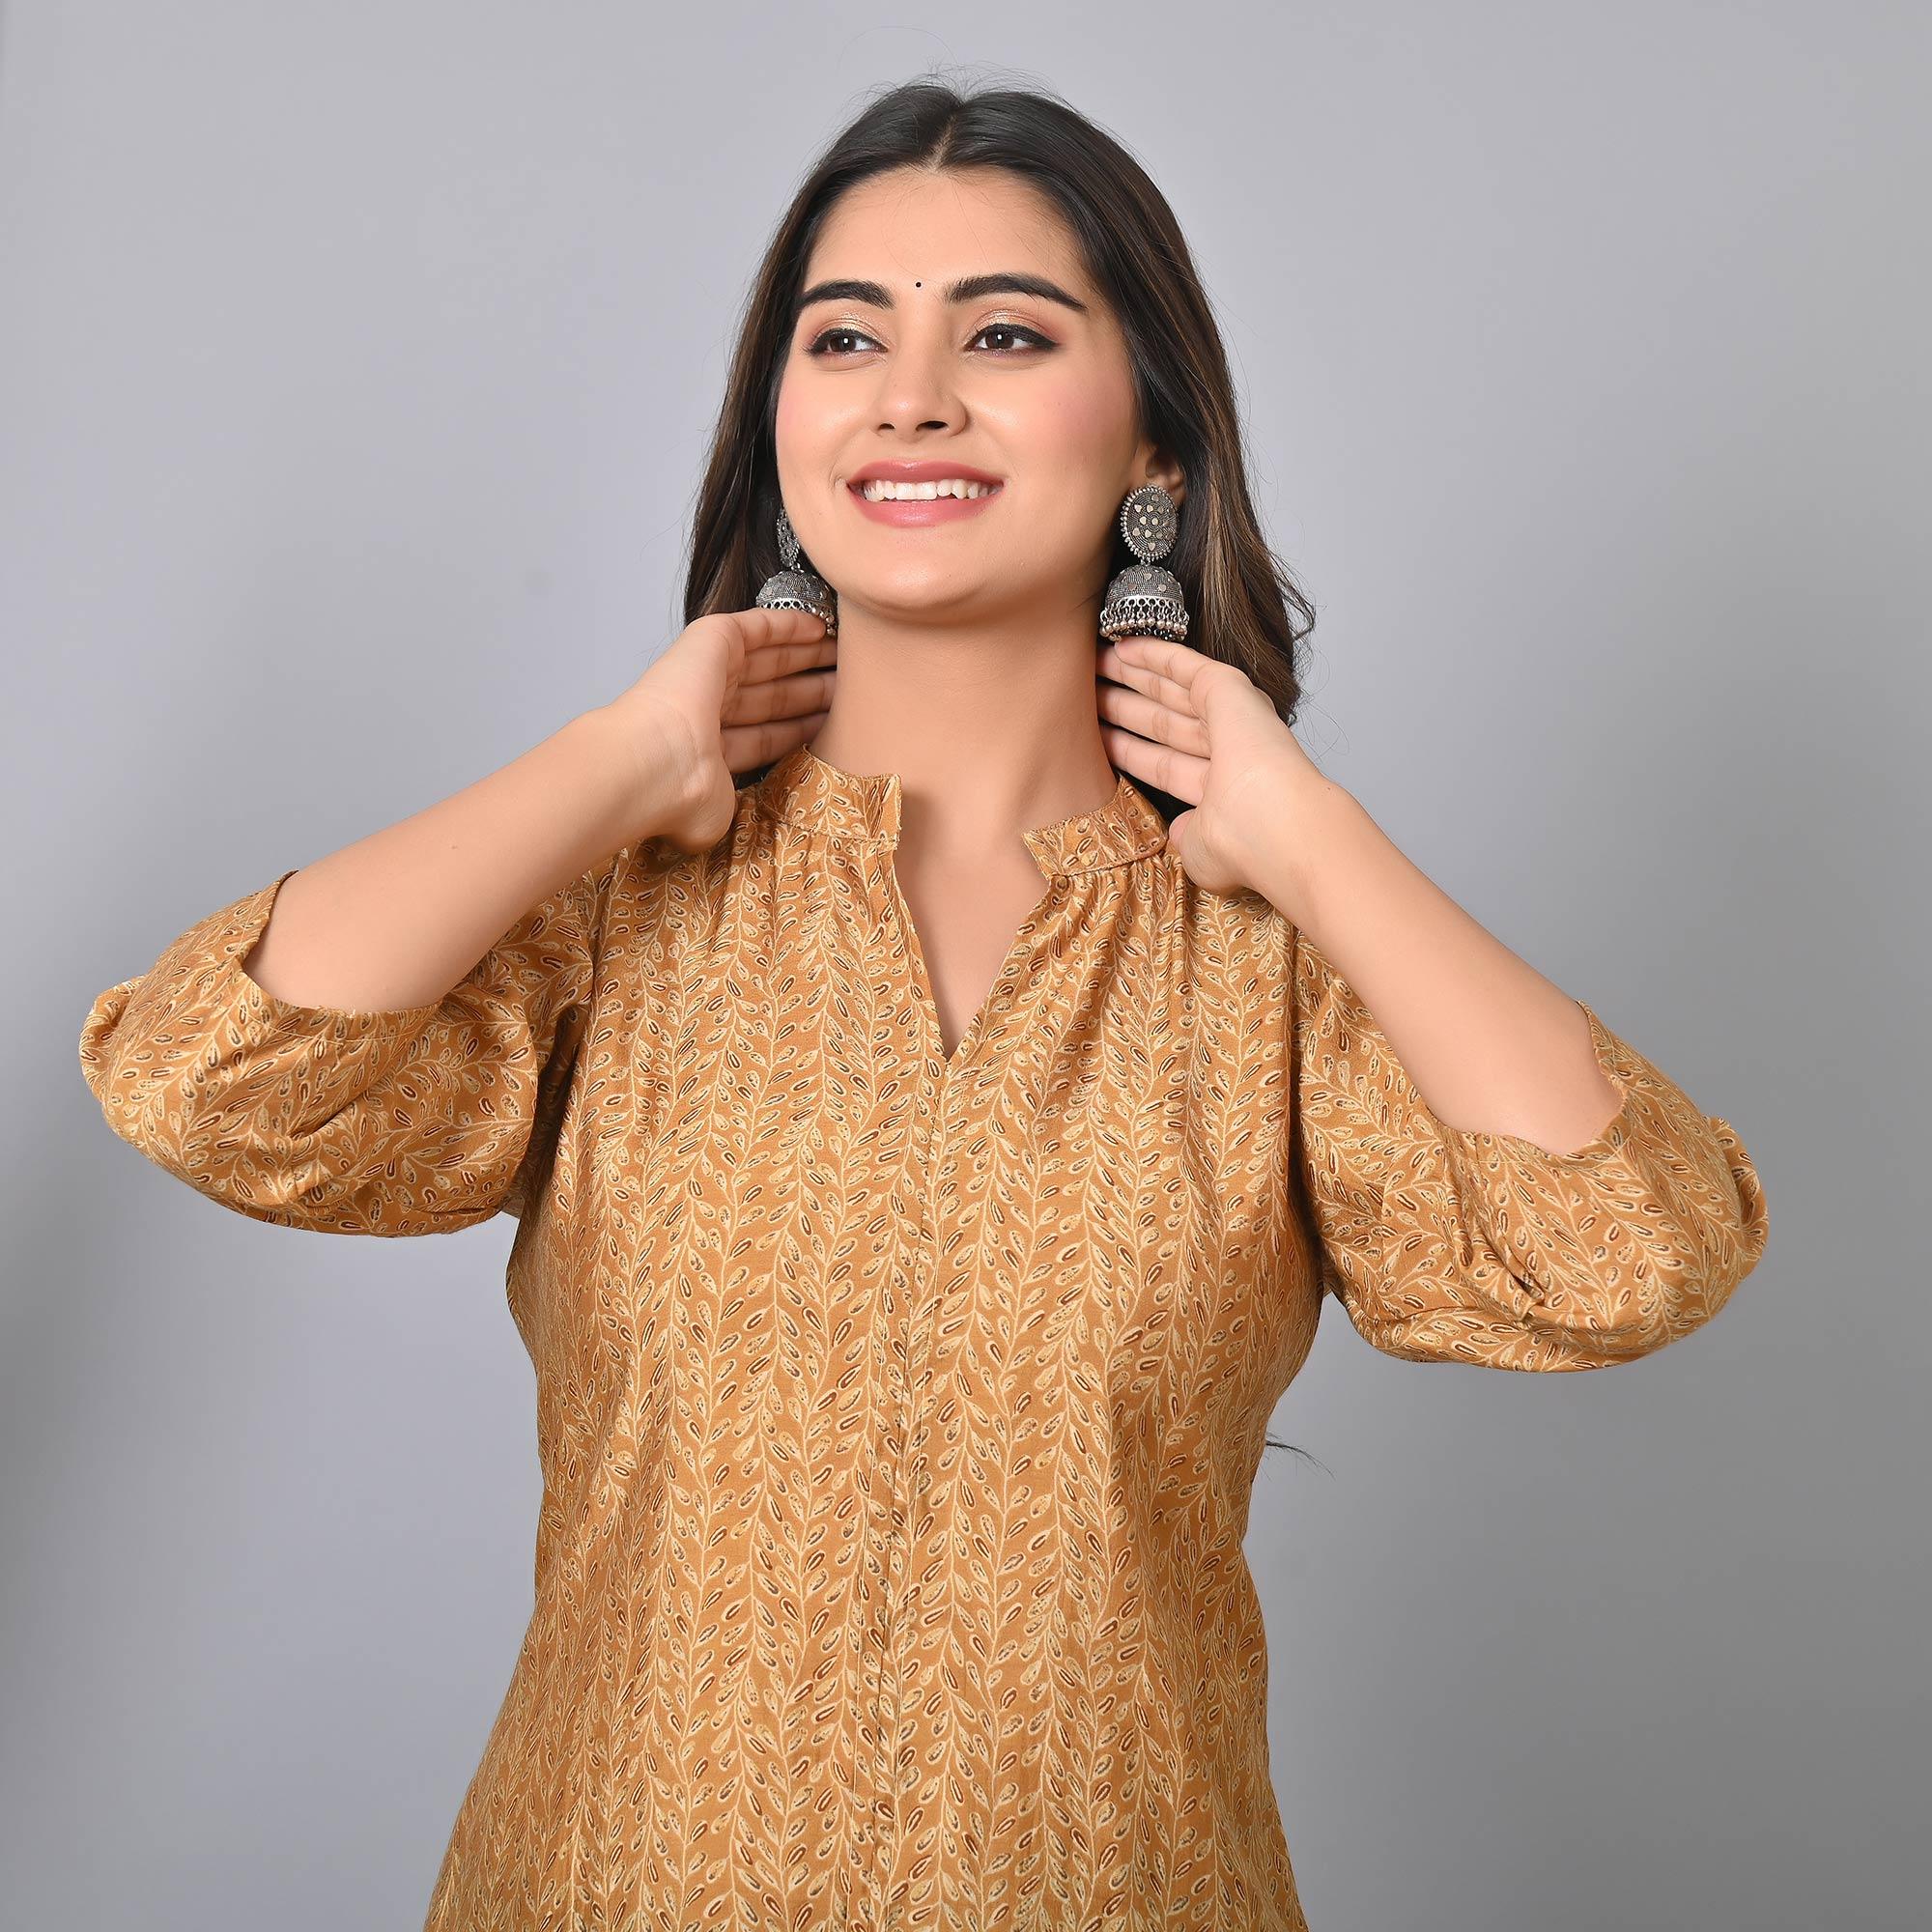 Chikoo Colored Floral Printed Chanderi Top - Peachmode